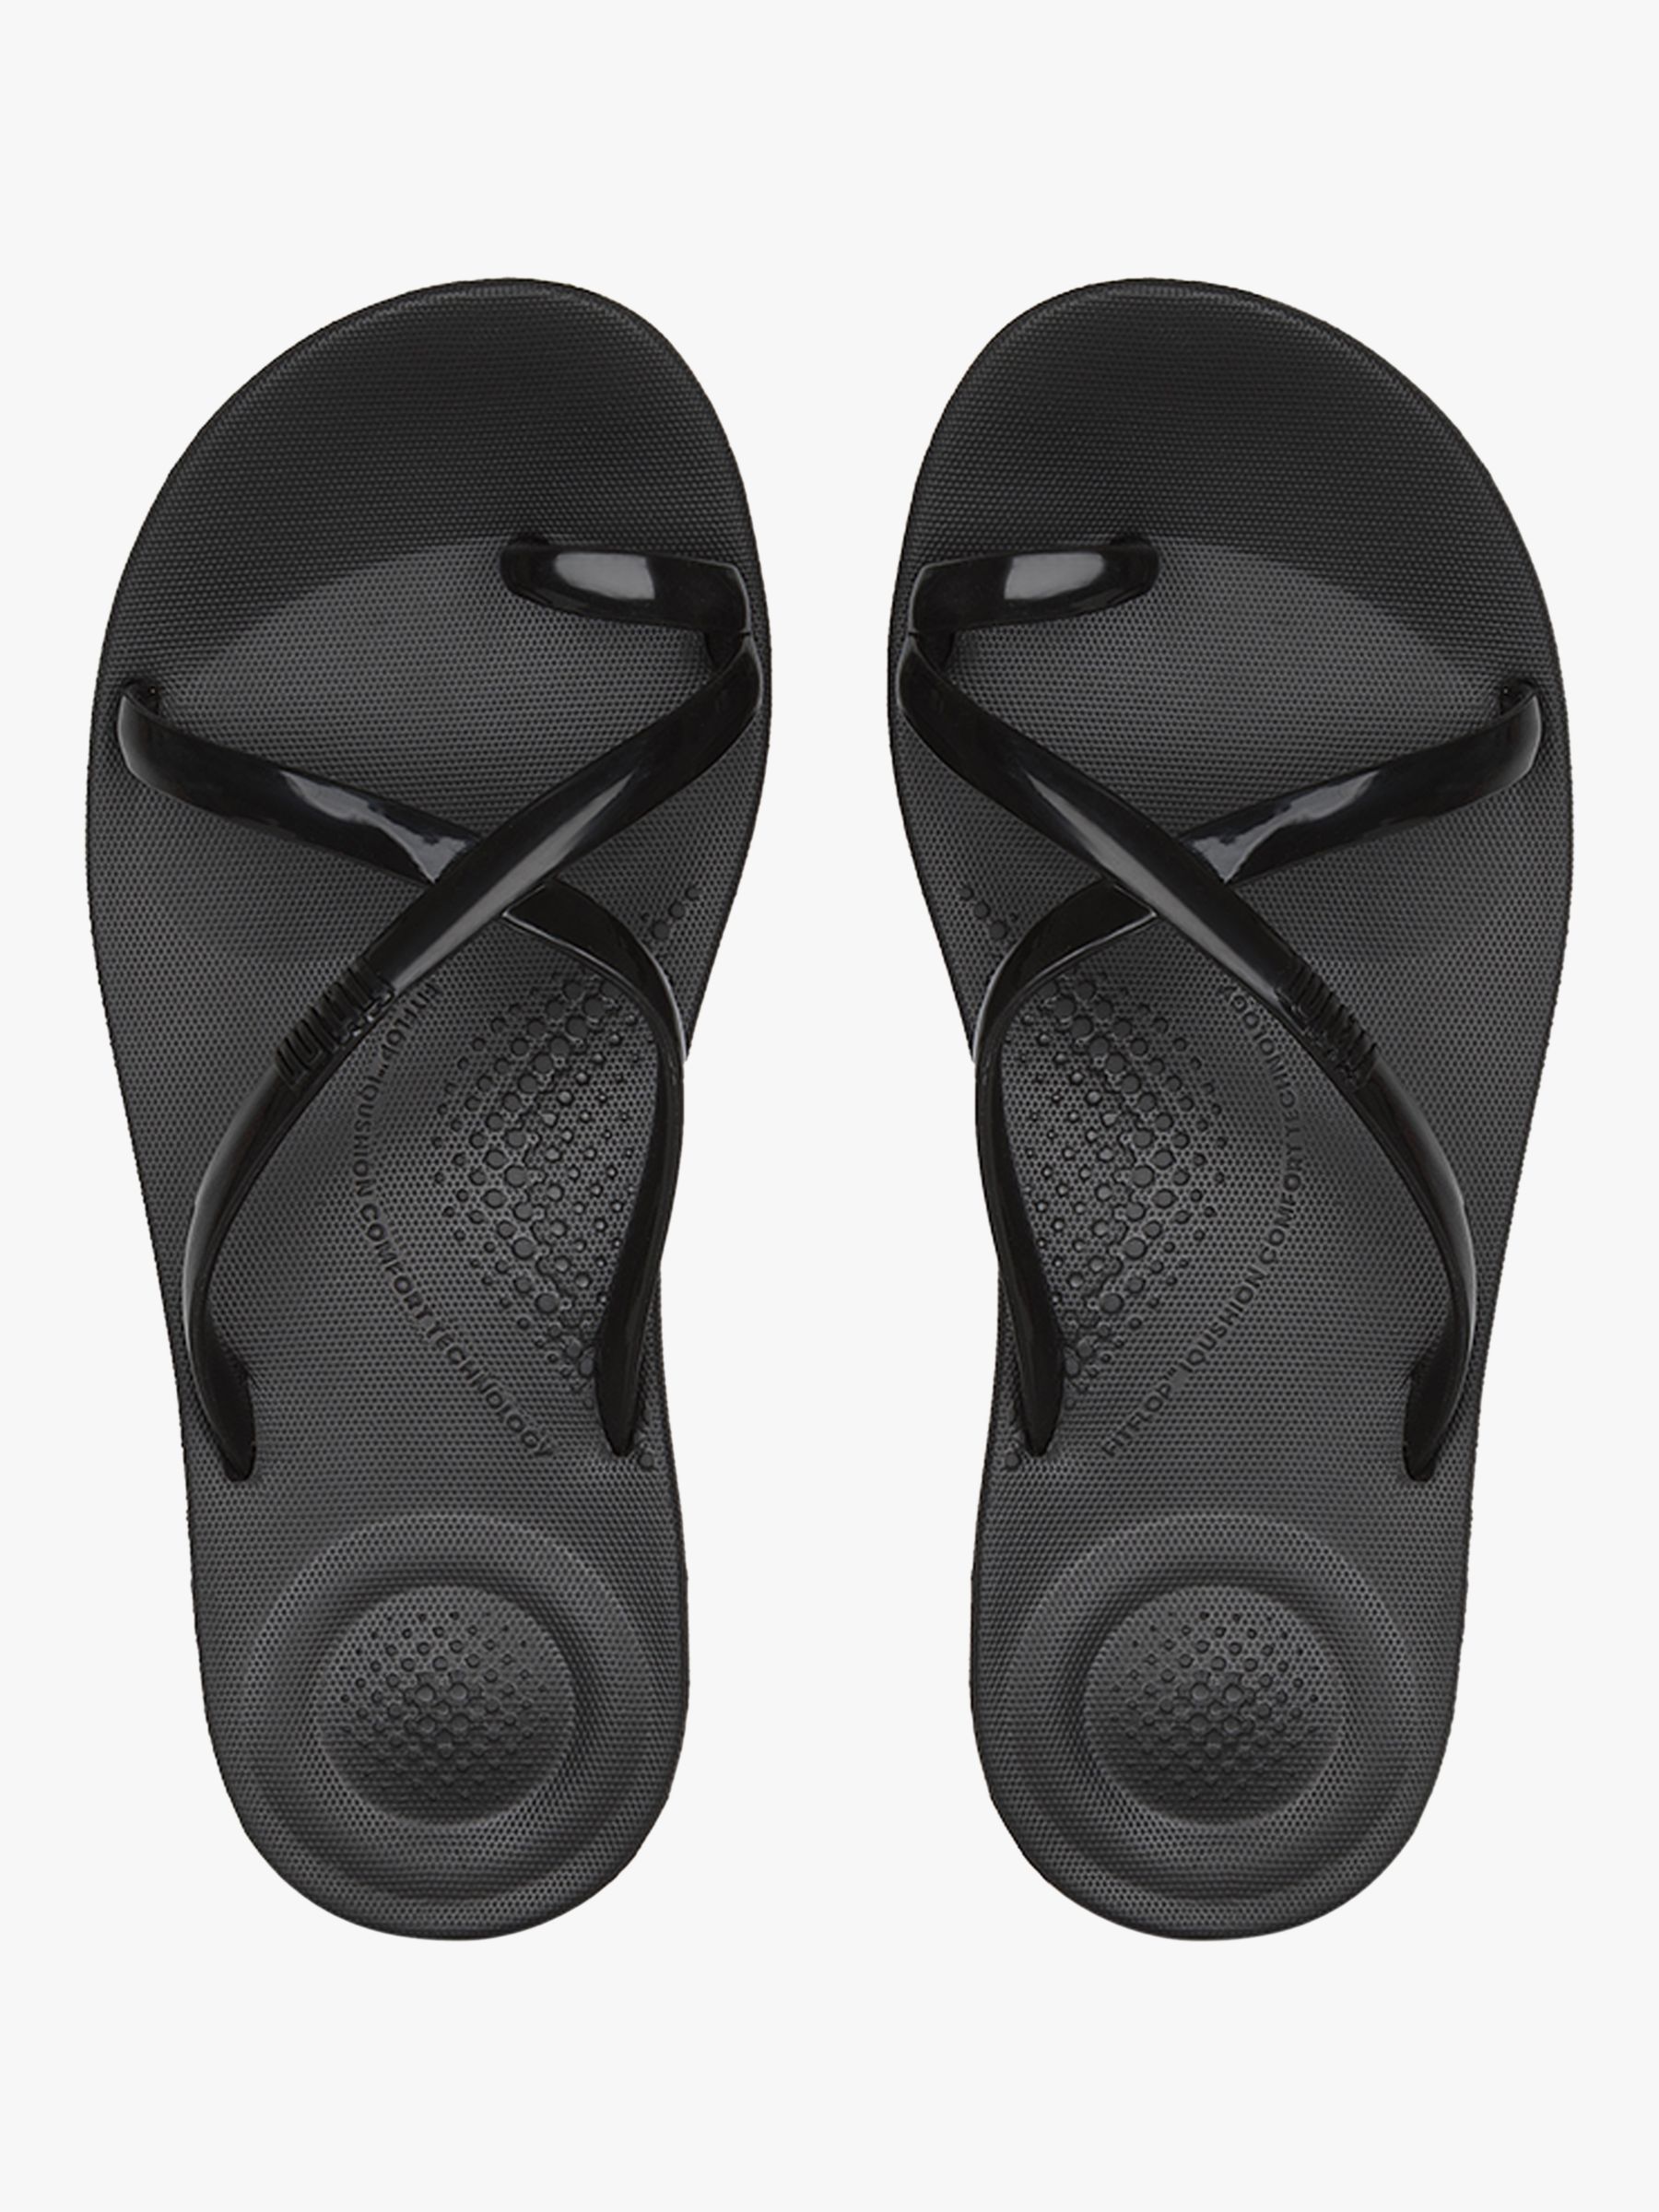 FitFlop IQushion Flip Flops, Black at John Lewis & Partners